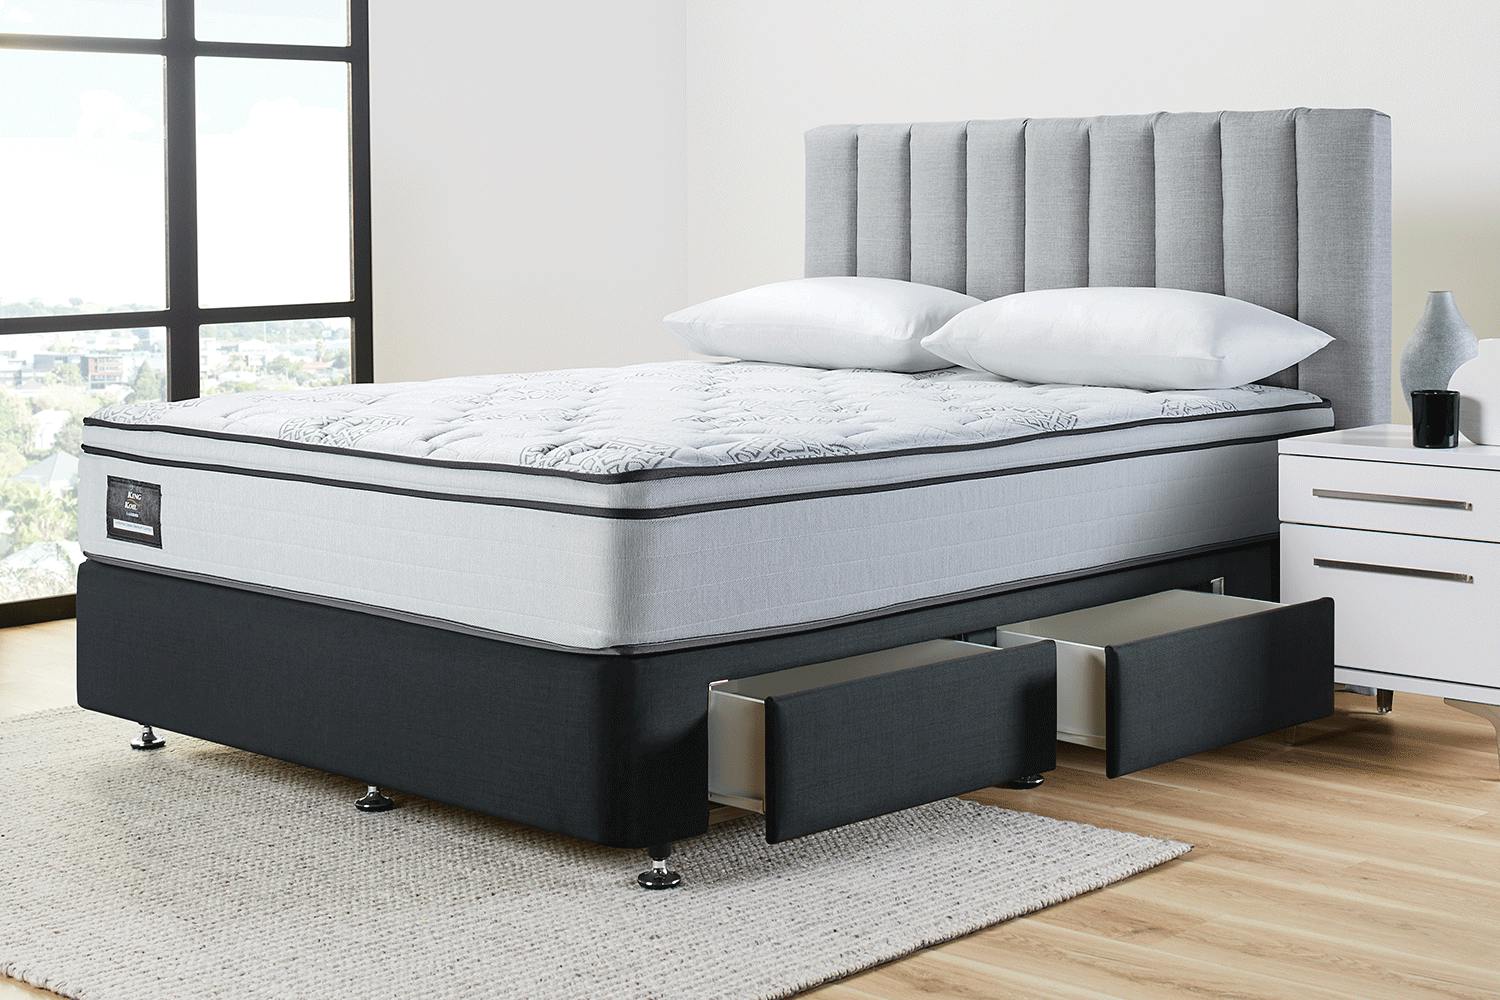 Conforma Classic Medium Double Bed With Drawer Base by King Koil